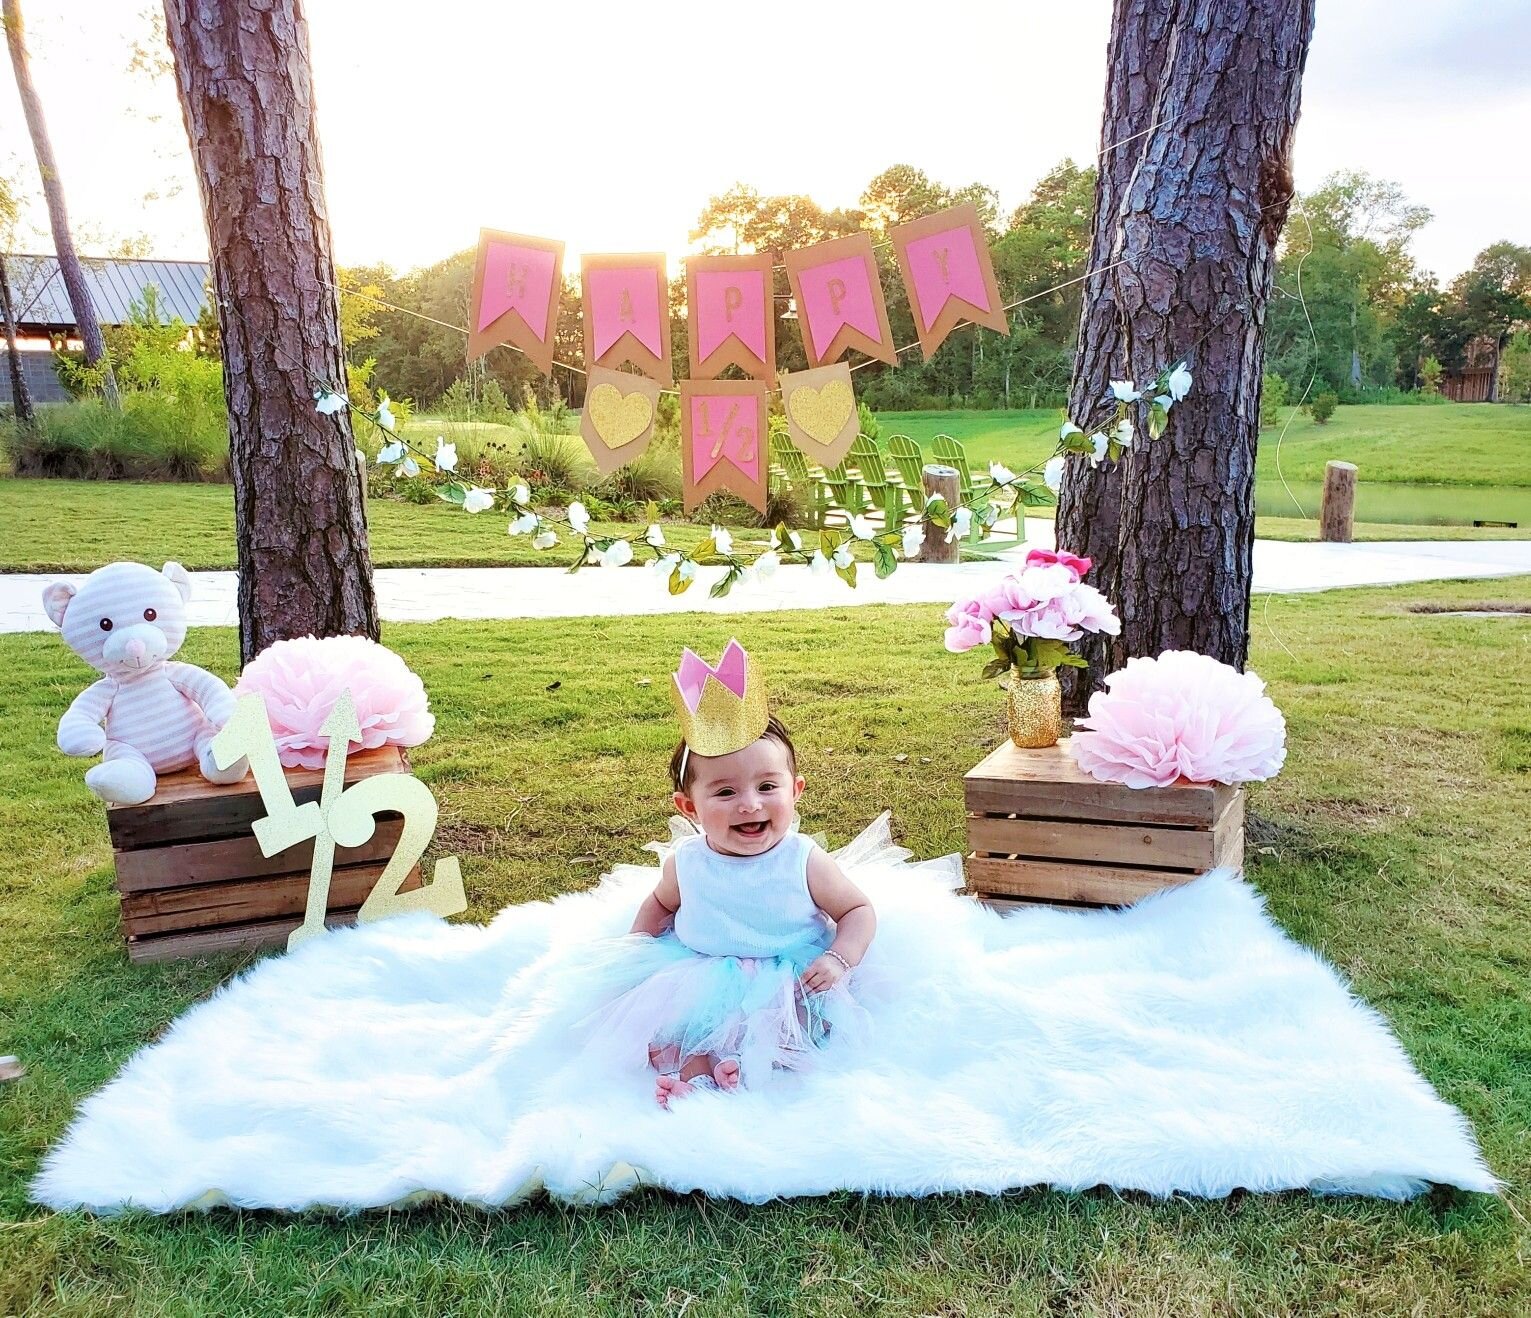 7 Decoration Ideas for a 6-Month Baby Birthday Party at Home